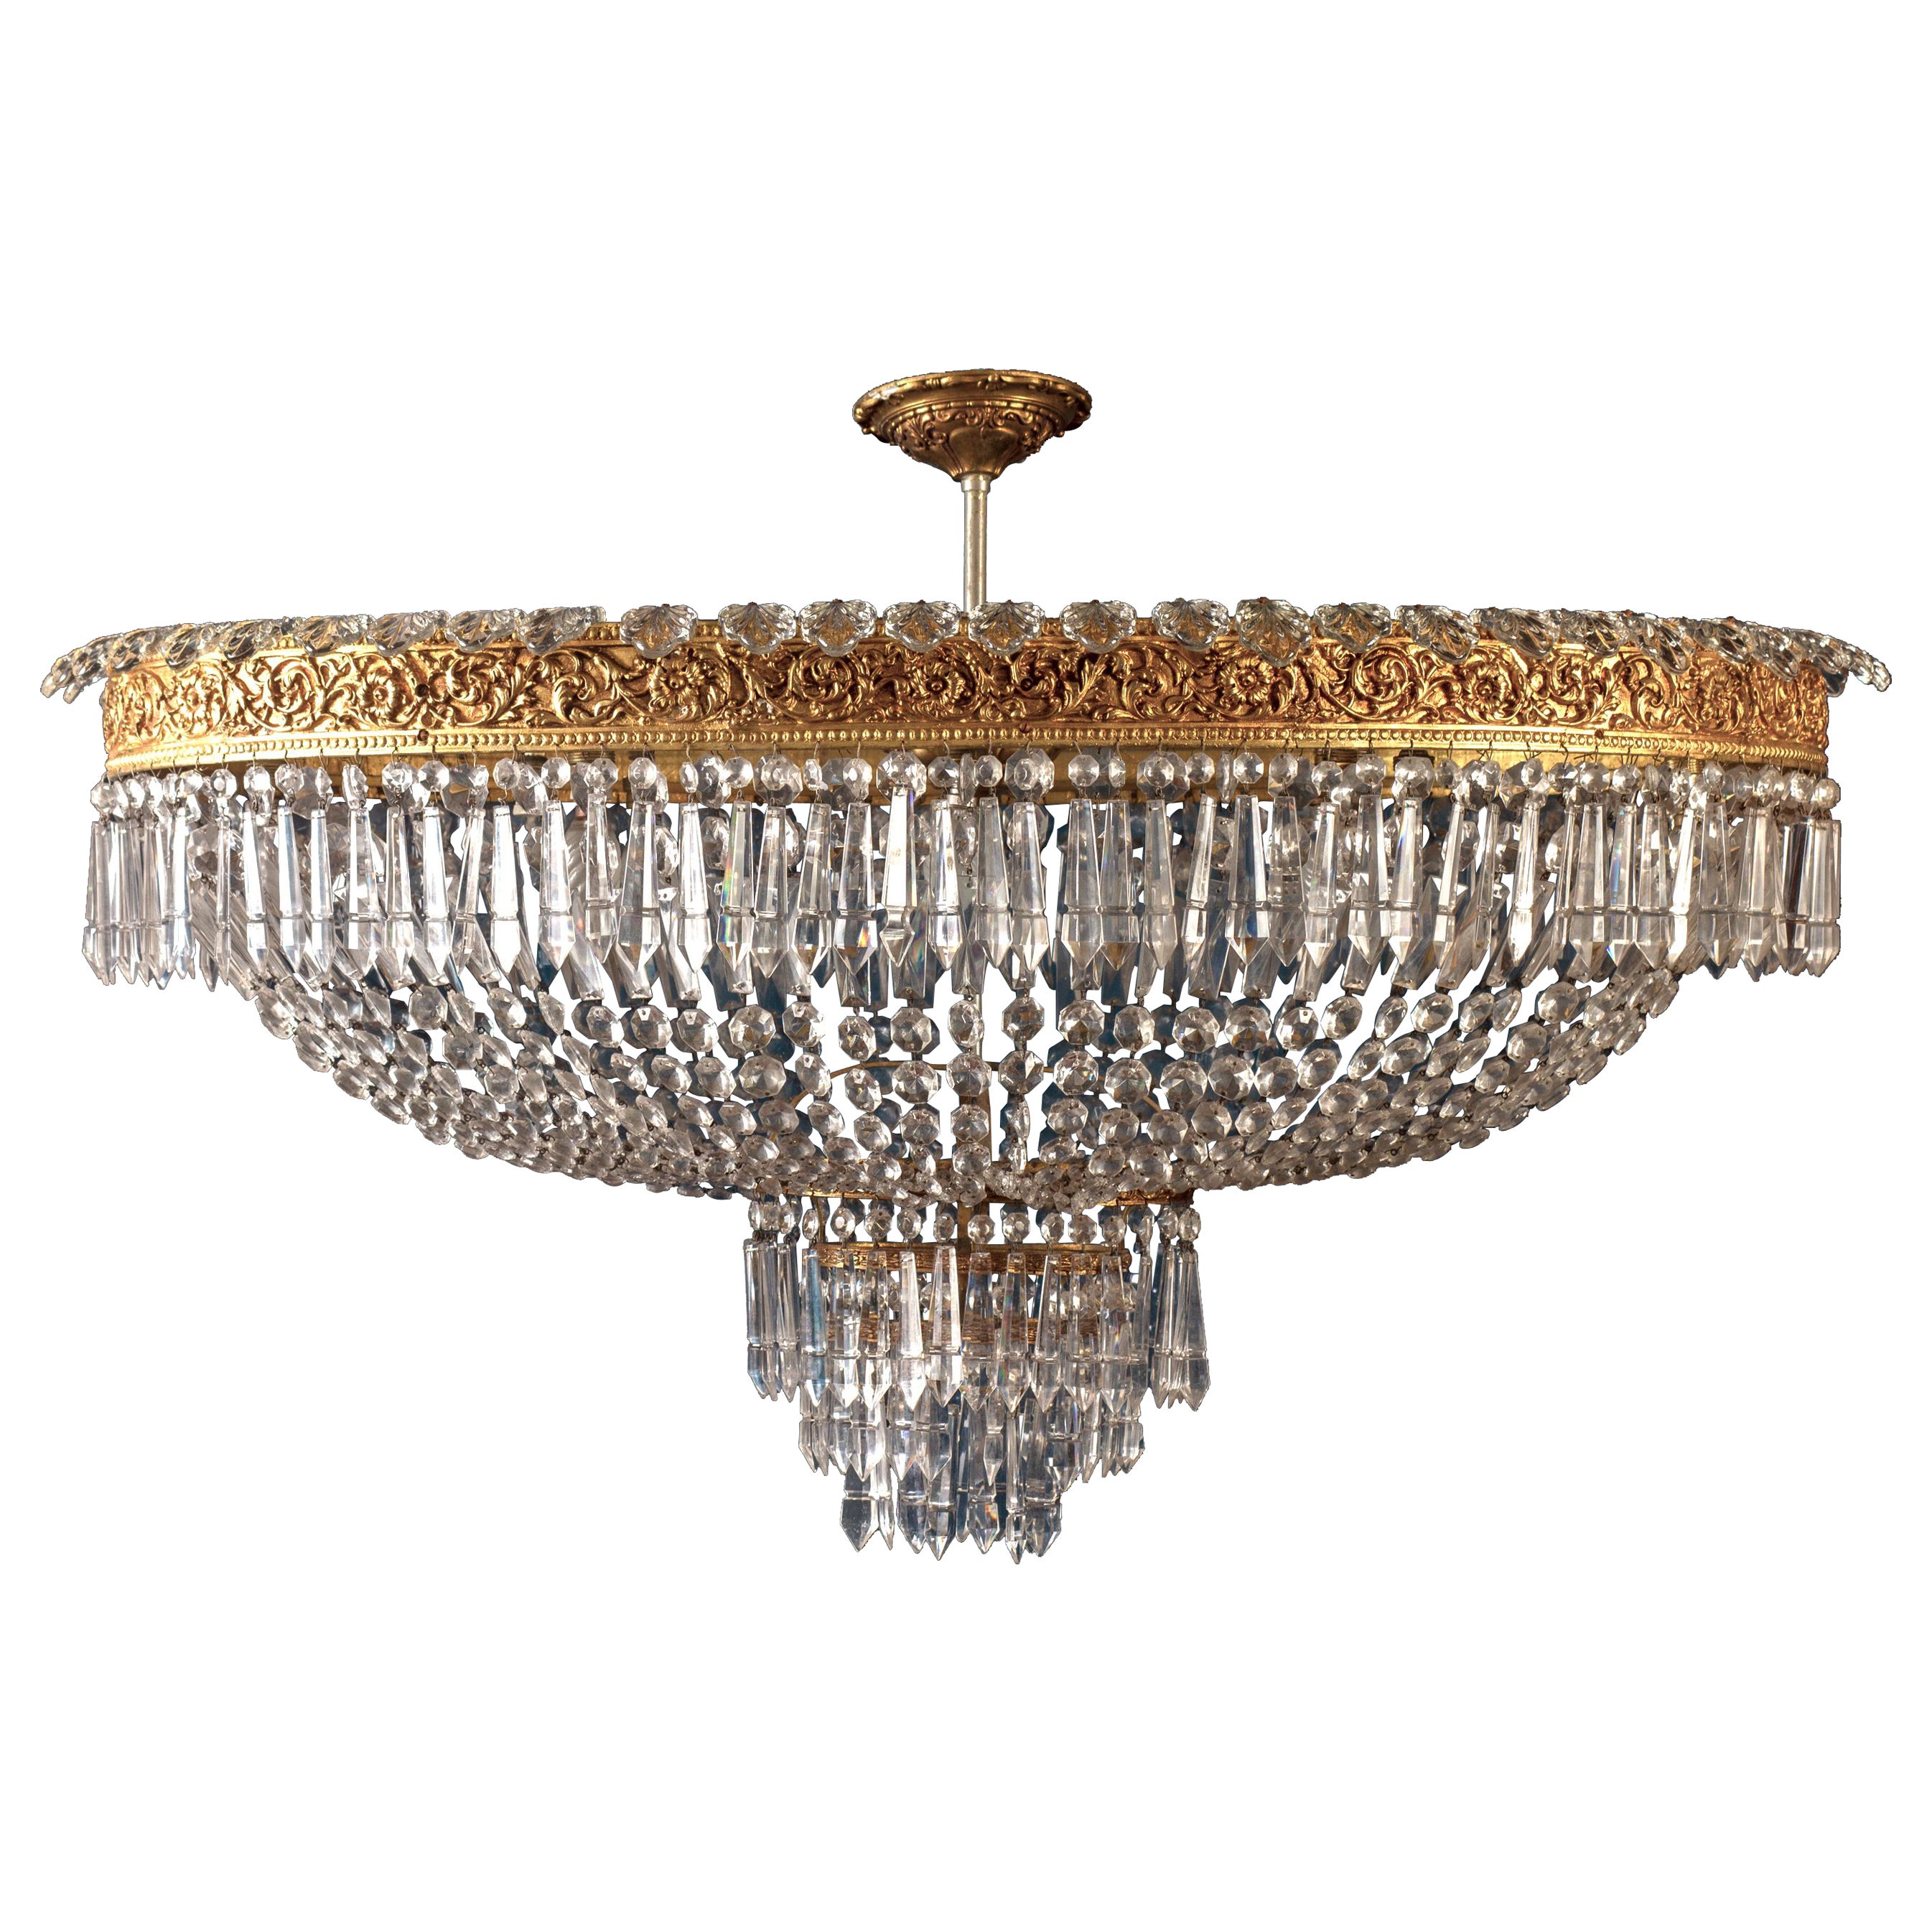 Luxurious Oval Shaped Crystal and Brass Chandelier, Italy, 1940